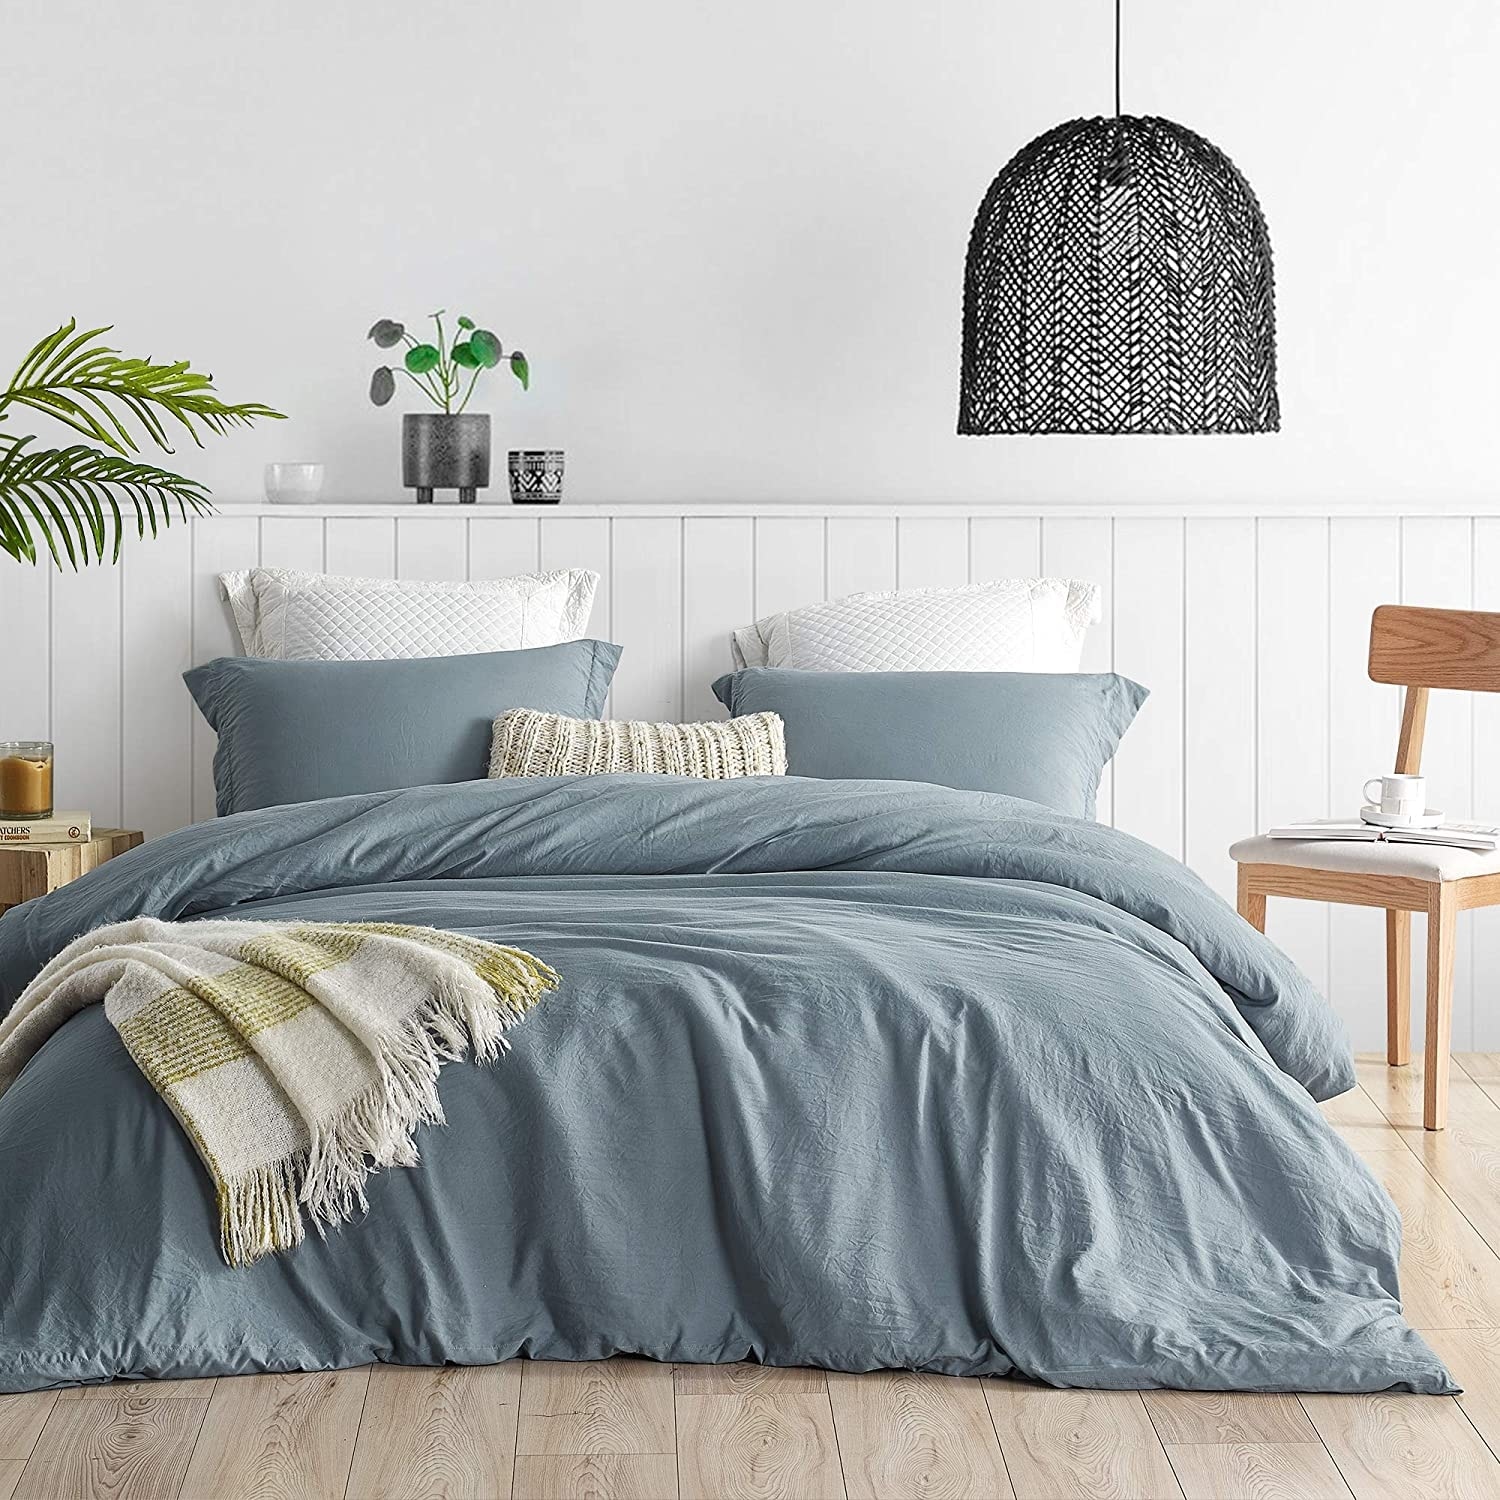 https://ak1.ostkcdn.com/images/products/is/images/direct/25e34835422bca8f68840a2eb9a7dbc6f1025429/Natural-Loft-Oversized-Comforter-Set---Smoke-Blue.jpg